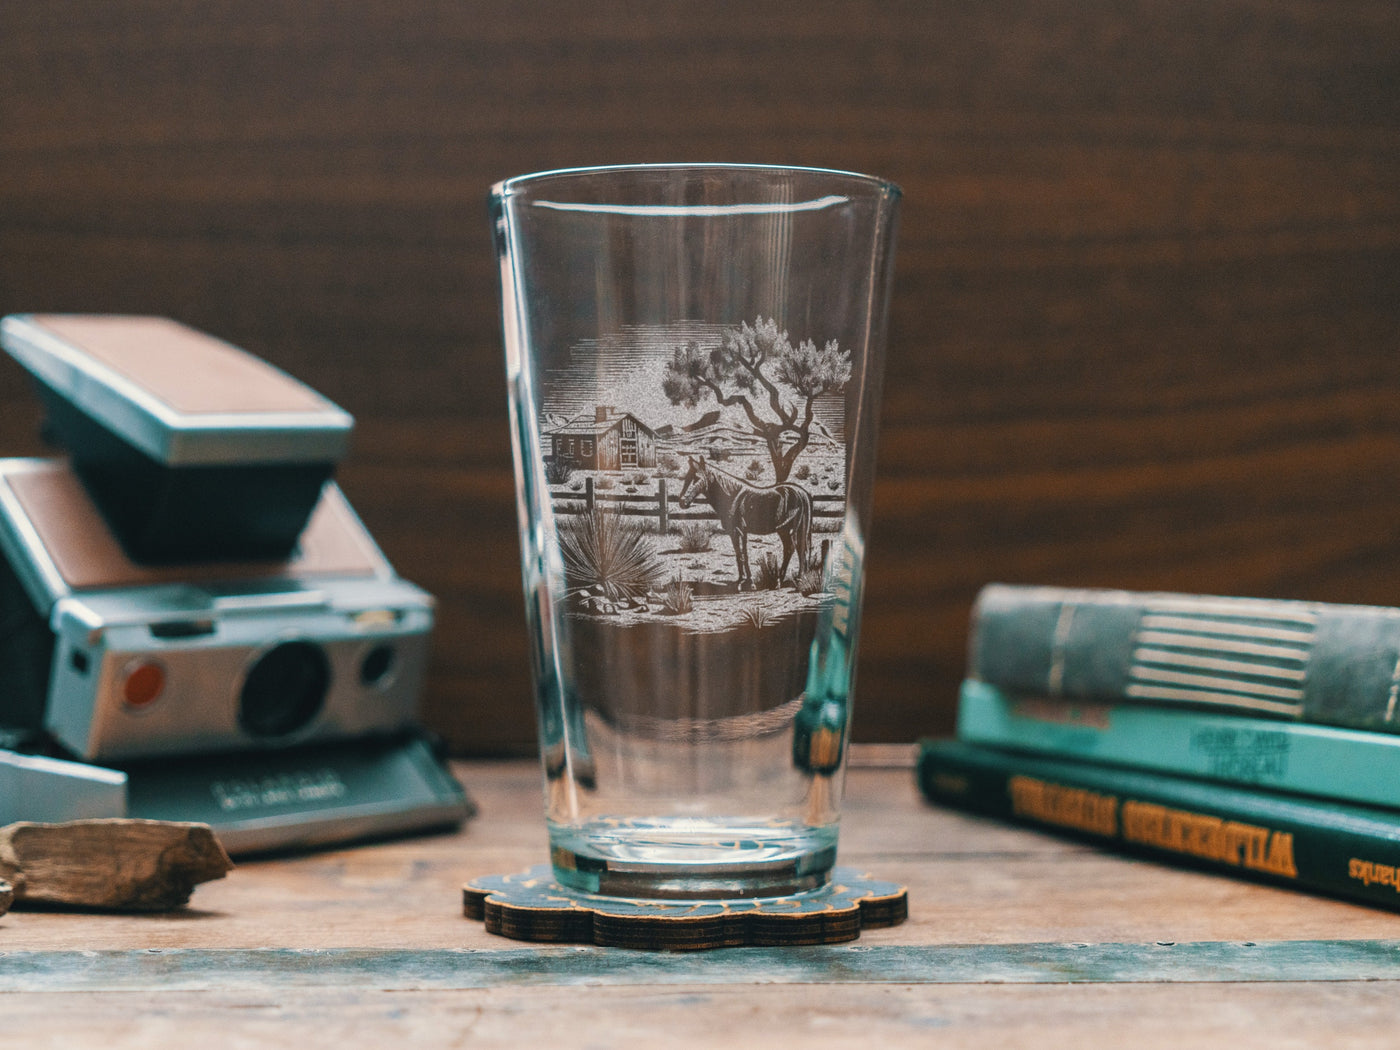 Wild West Horse Ranch Glasses | Personalized etched glassware for beer, whiskey, wine & cocktails. Western Desert Scene, Southwestern Decor.